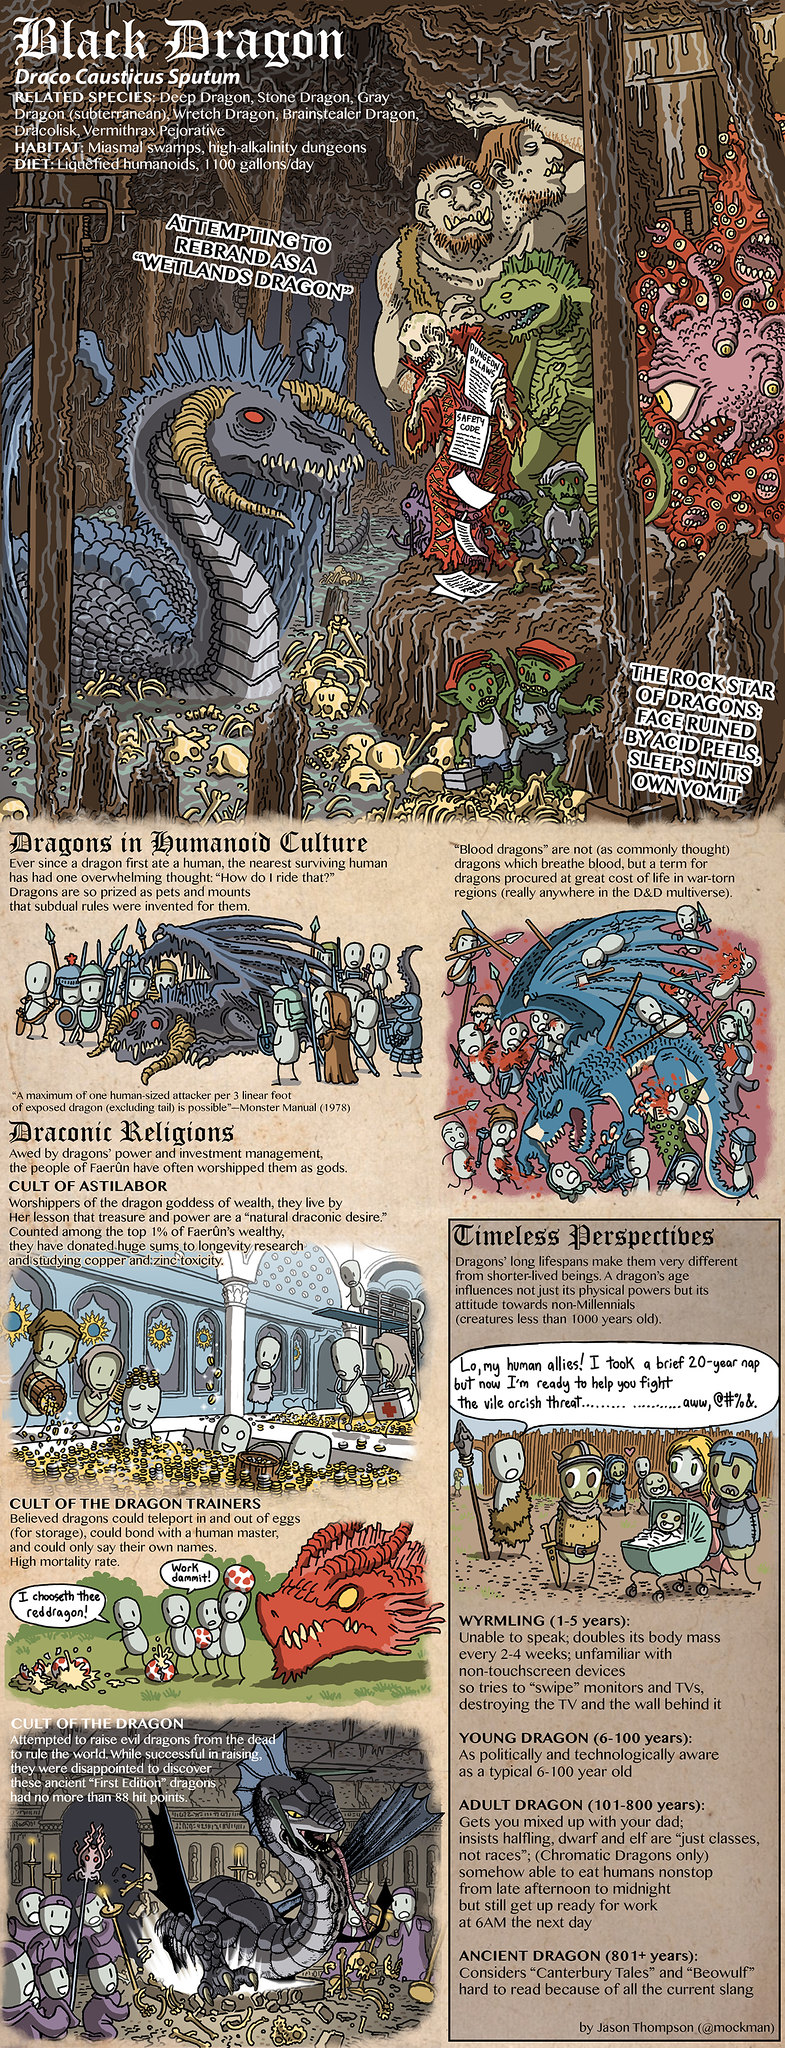 The Dragons of Dungeons & Dragons by Jason Thompson - Black Dragon